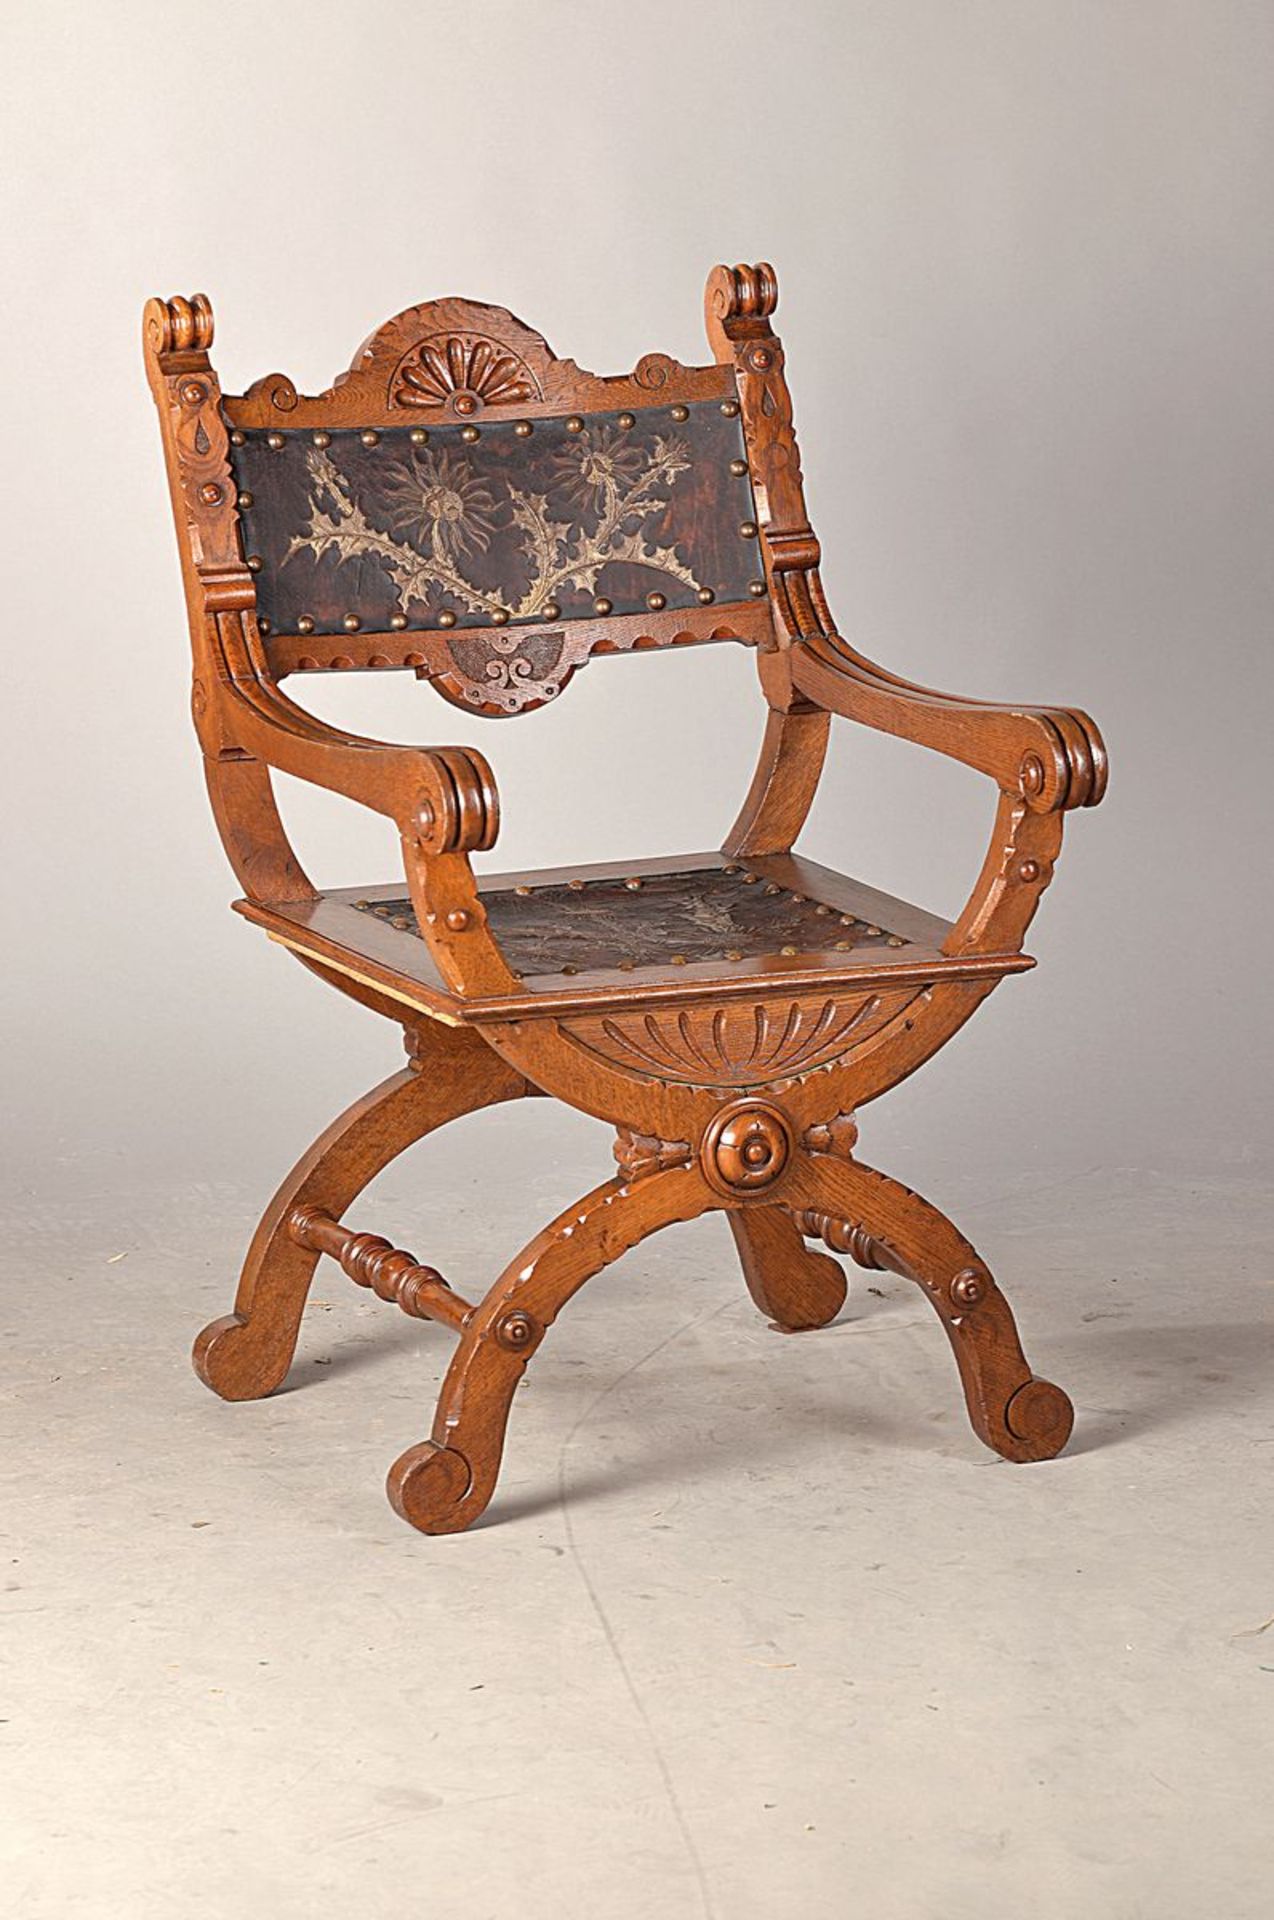 chair around 1900, oak massive, carved, leather cover, Sh. approx 45 cm, H.approx. 96 cm, minor